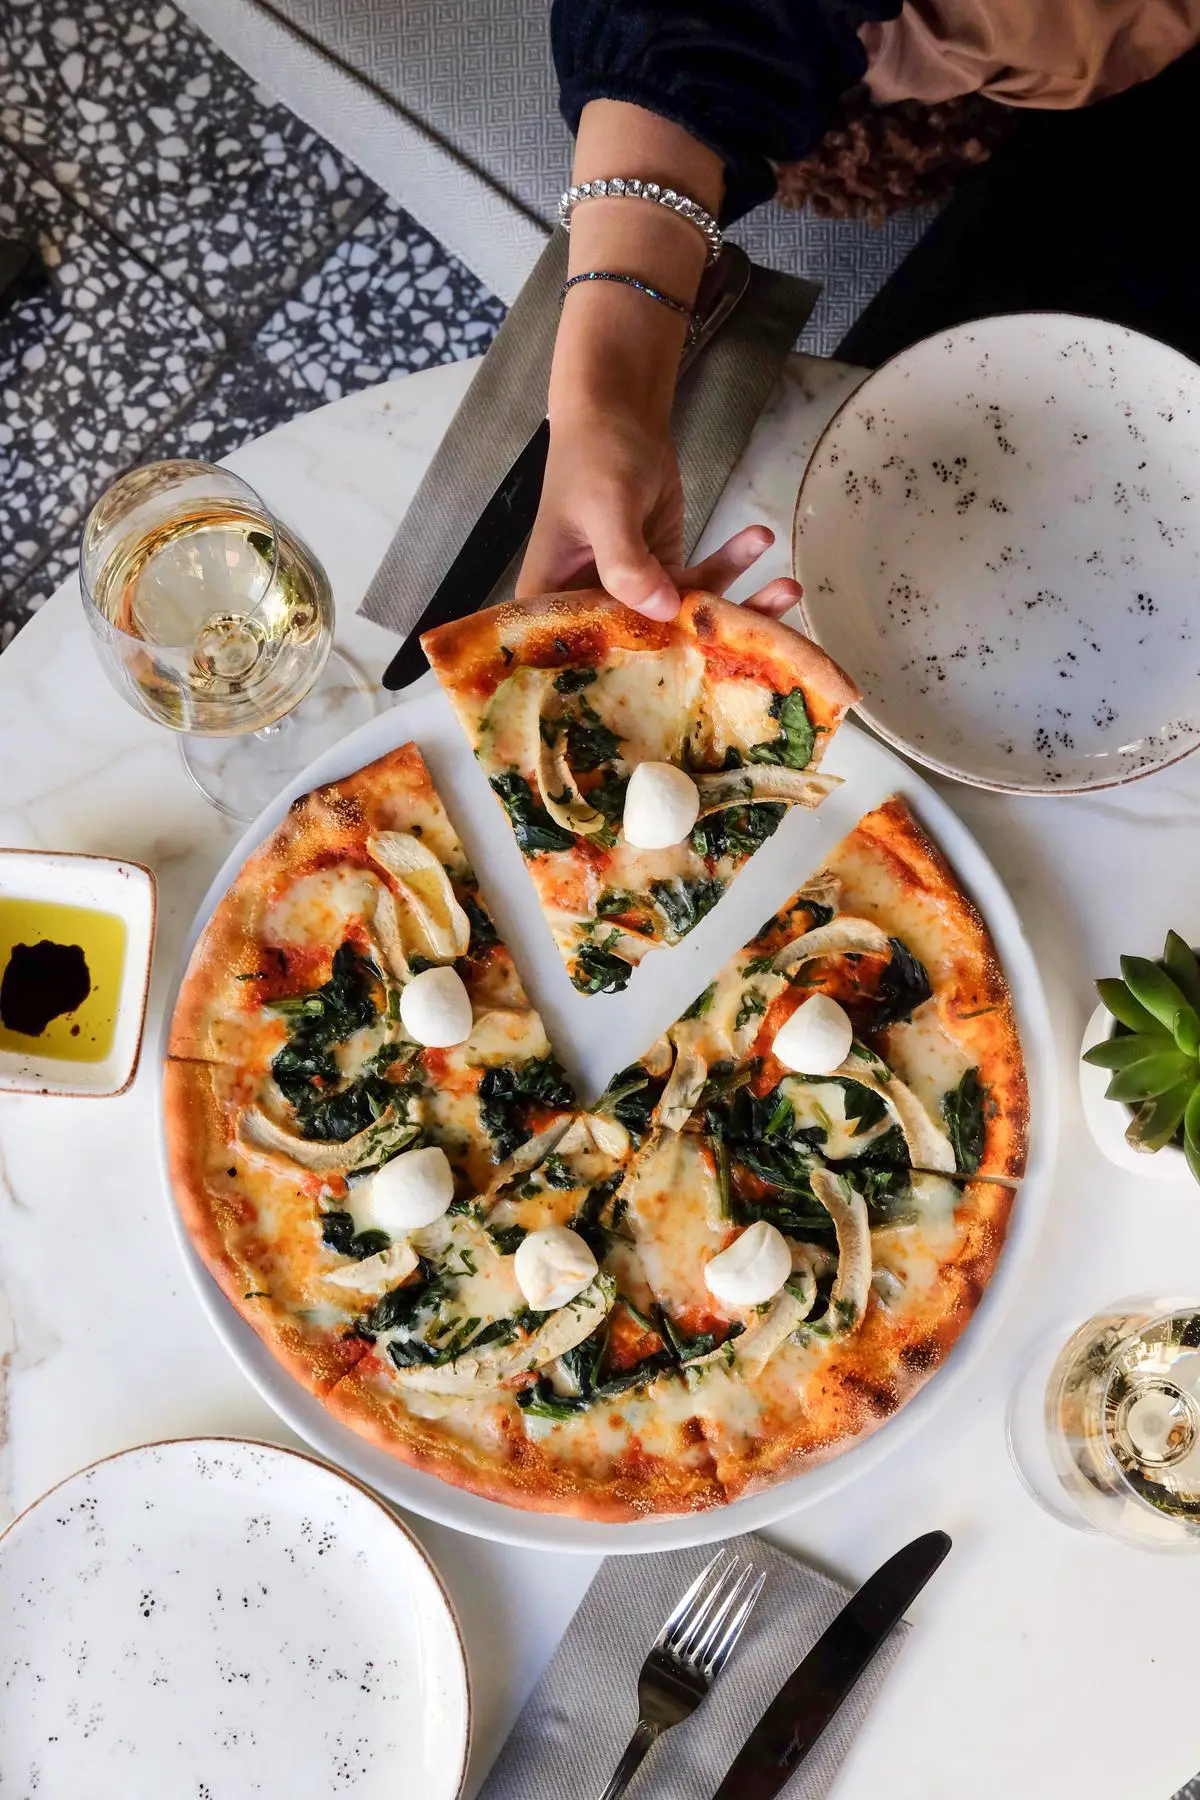 A delicious-looking gluten-free pizza topped with fresh vegetables and gooey cheese, ready to be enjoyed by a family at the dinner table.